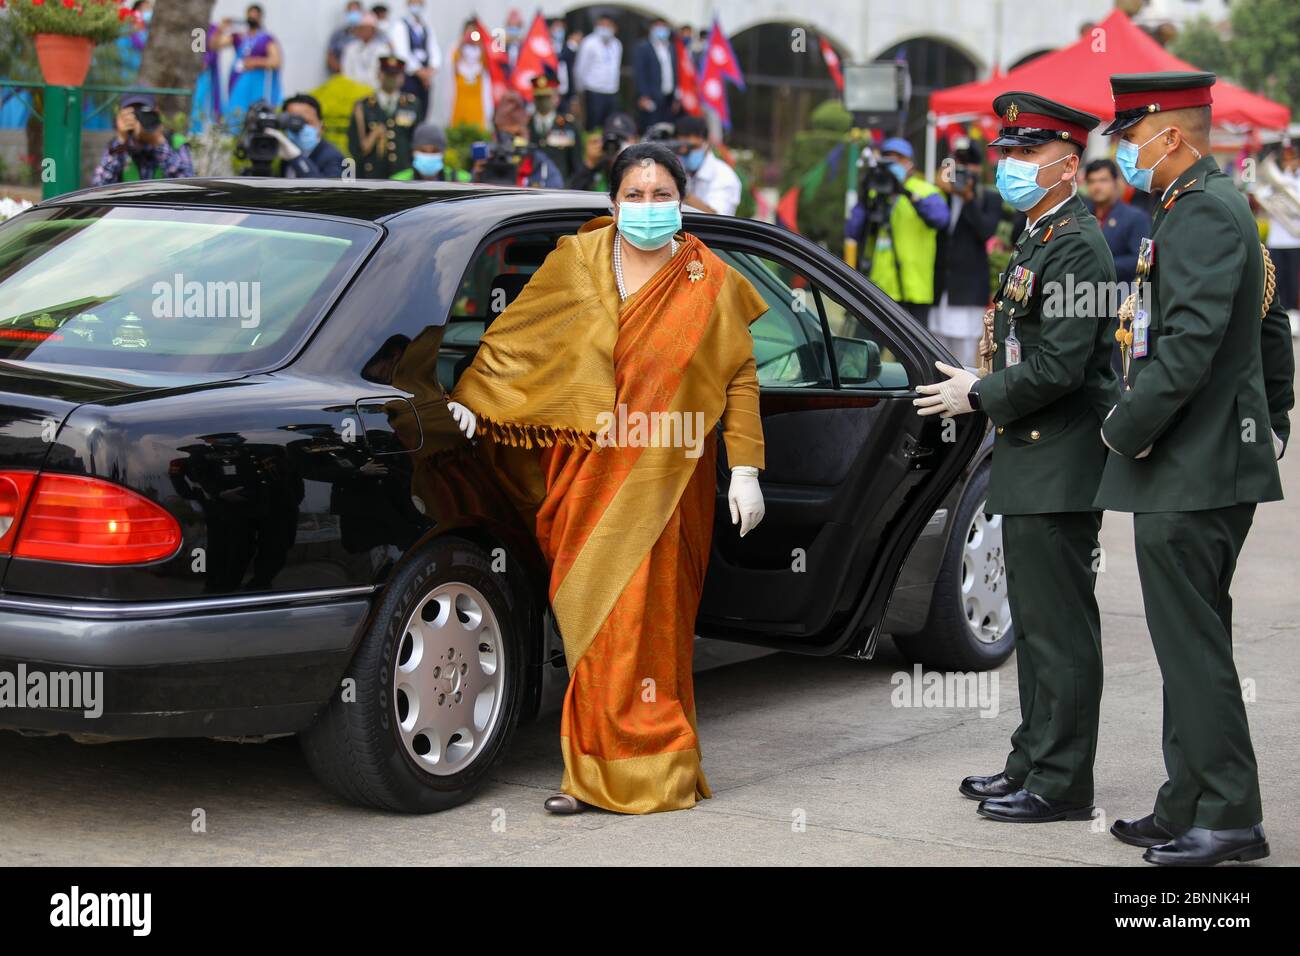 Nepal's President, Bidhya Devi Bhandari wearing a face mask and gloves on her arrival at the parliament to present government's policies and programs for the upcoming fiscal year during the Coronavirus (COVID-19) lockdown crisis. Stock Photo